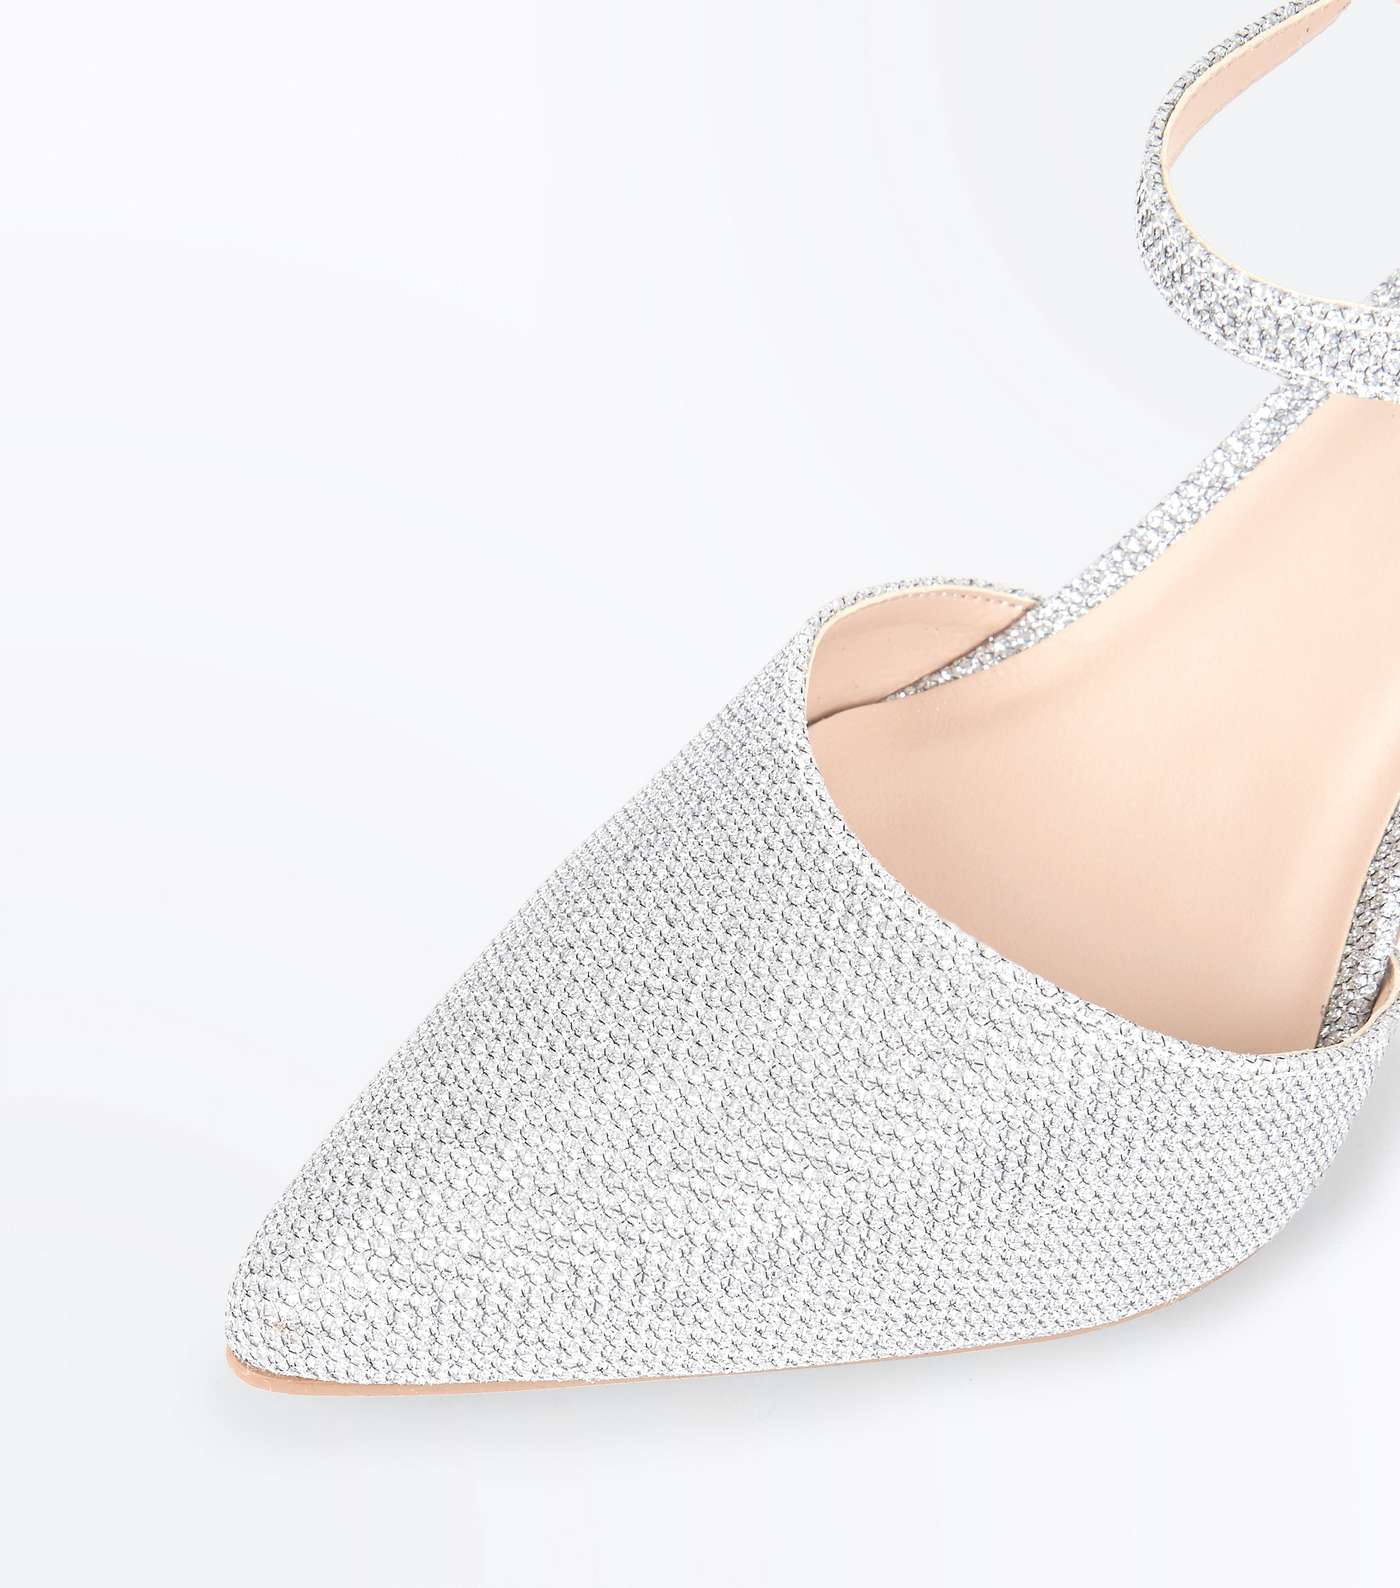 Silver Glitter Cross Strap Side Pointed Courts Image 3